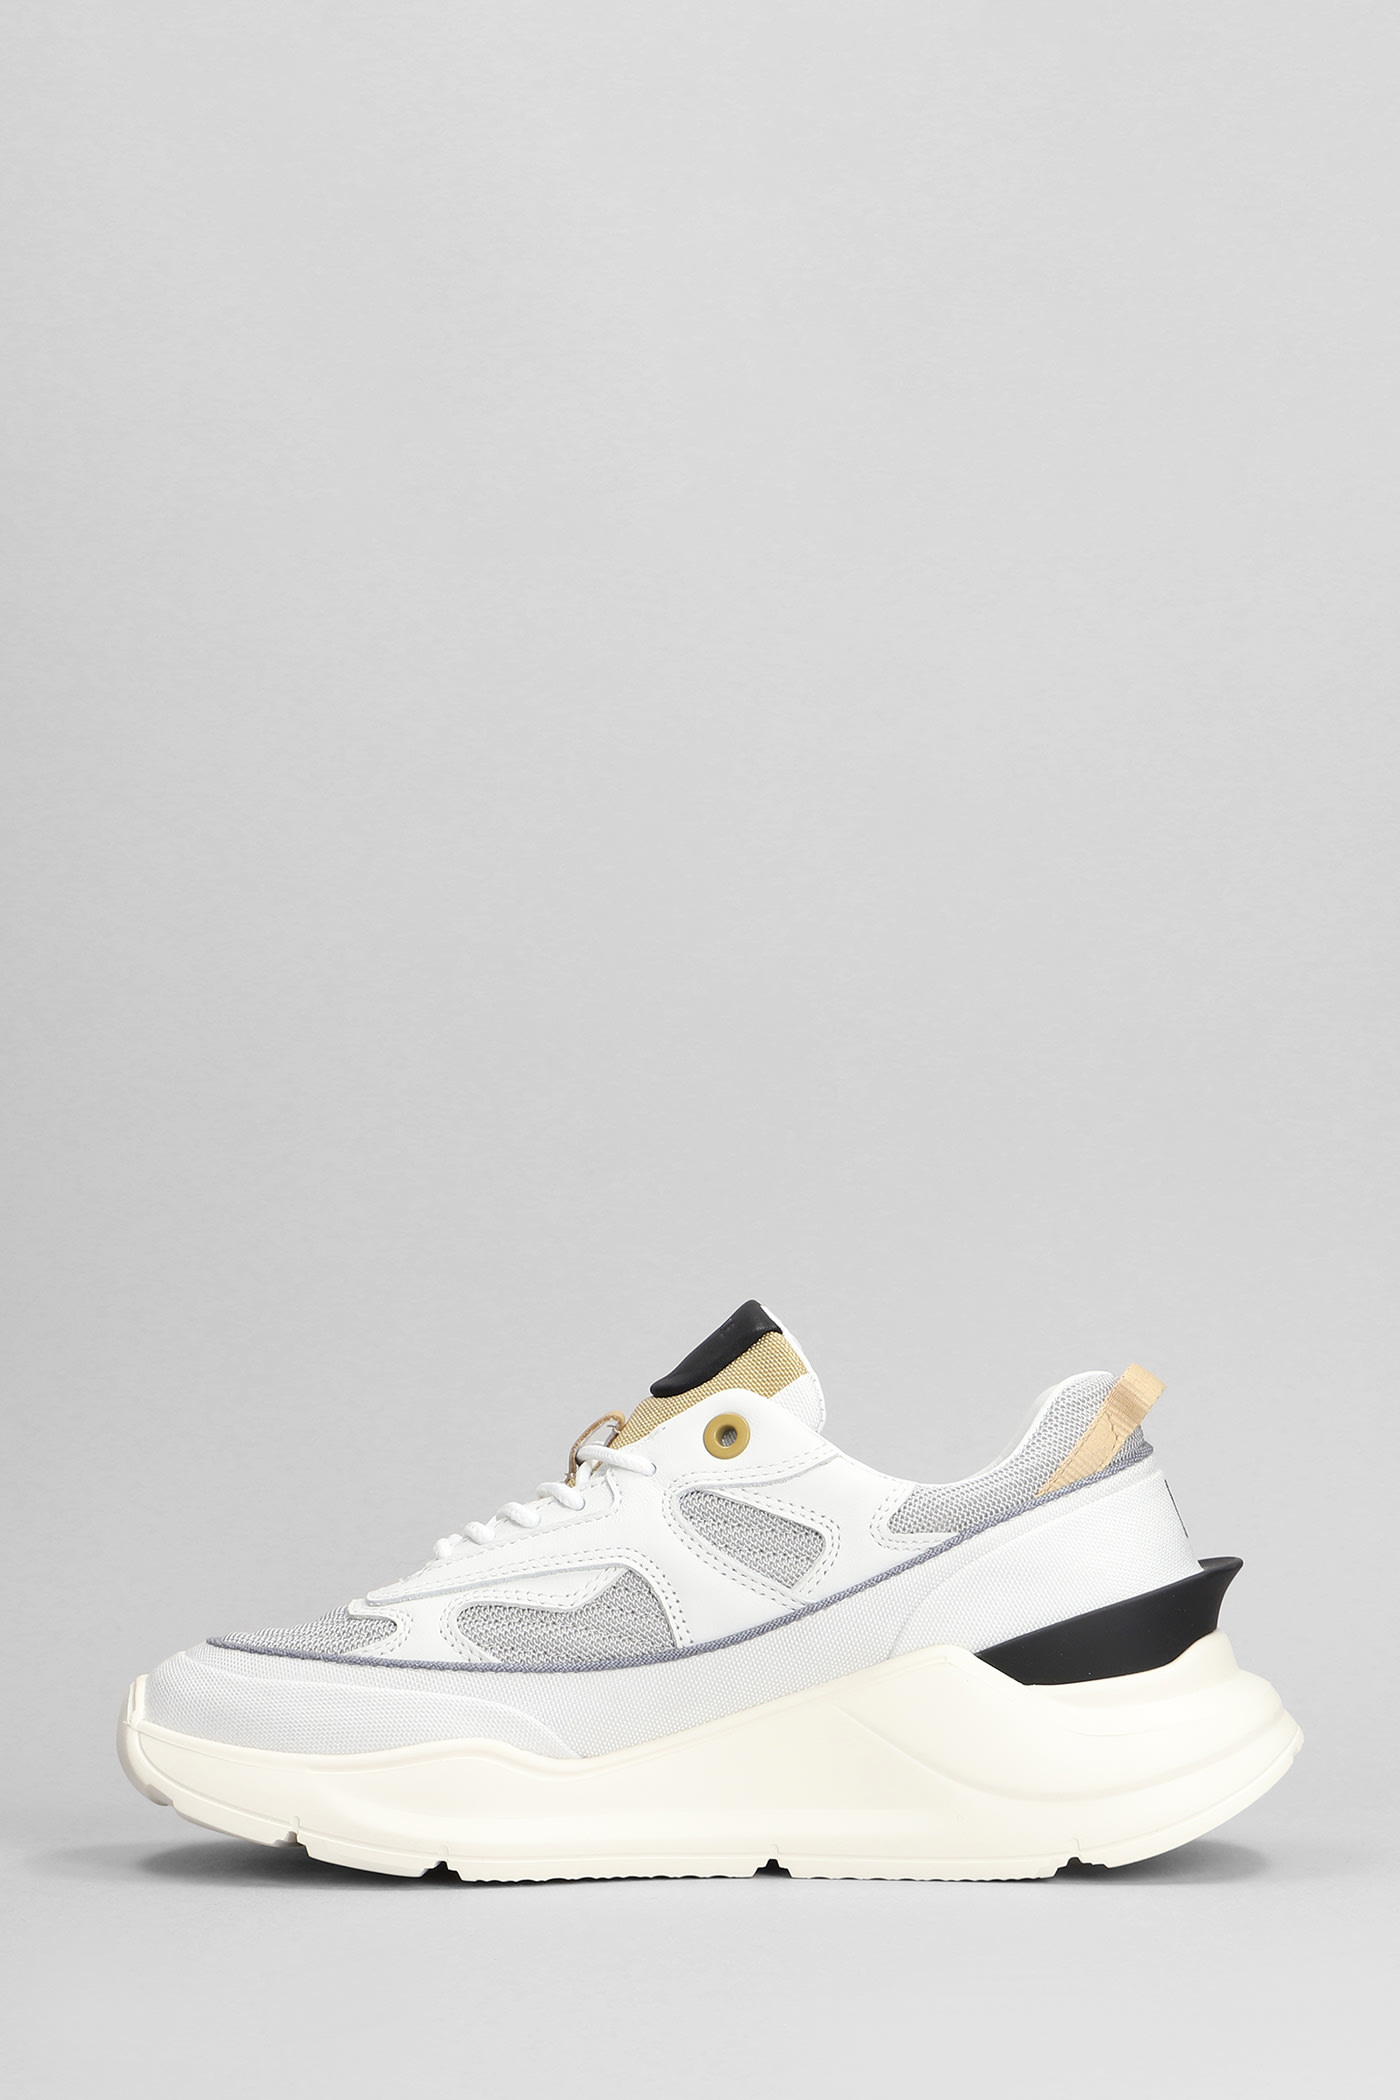 Shop Date Fuga Sneakers In White Leather And Fabric